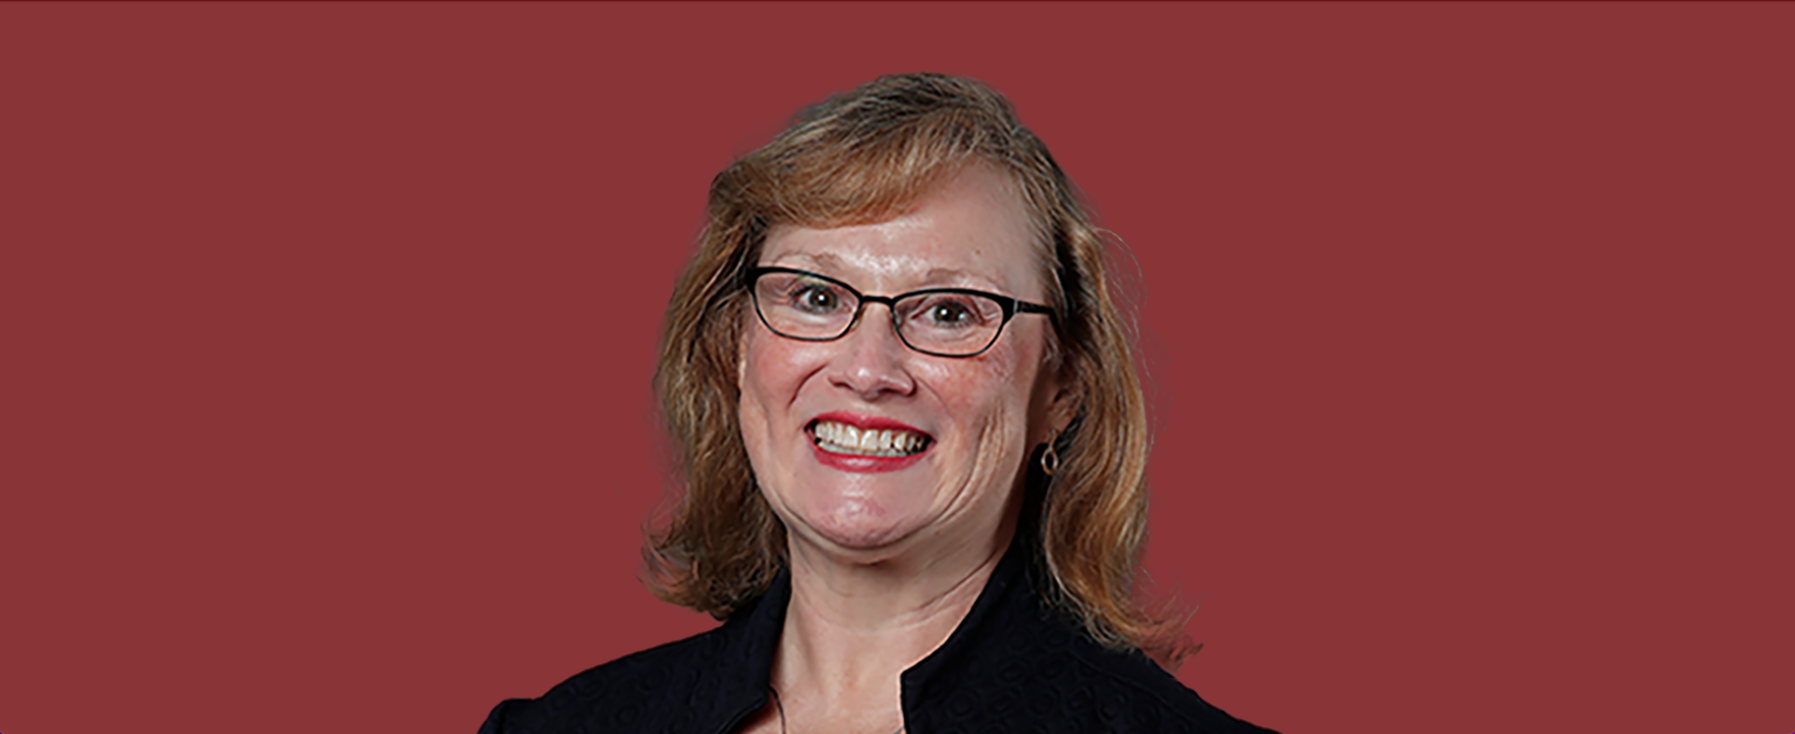 Associate Professor Carol Kostovich Awarded AACN Faculty Scholars Grant to Develop Diversity, Equity, and Inclusion Toolkit for Simulation